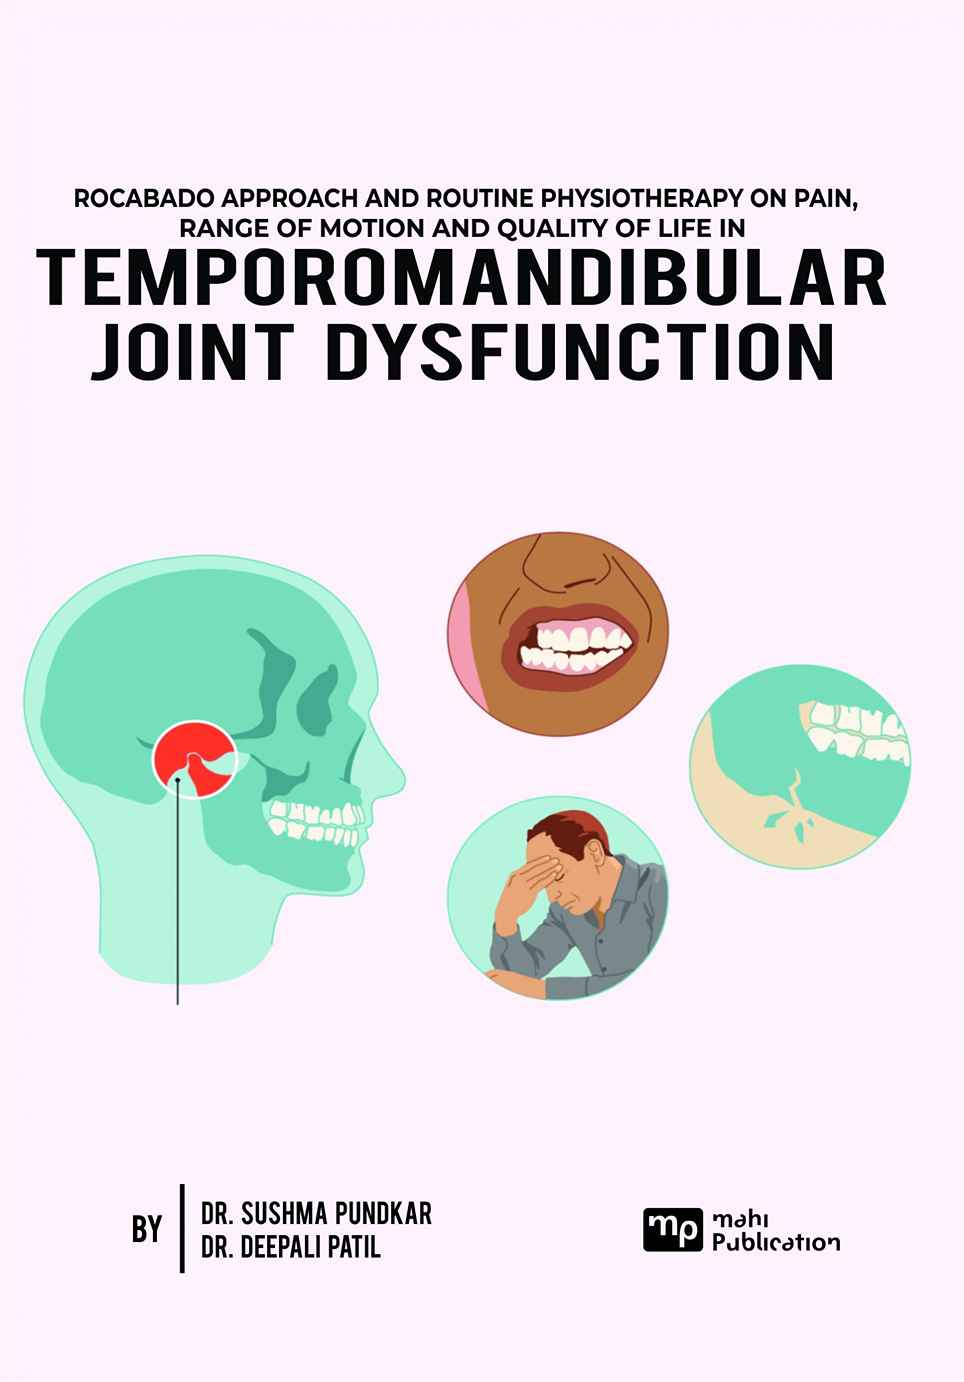 Rocabado Approach and Routine Physiotherapy on Pain, Temporomandibular Joint Dysfunction